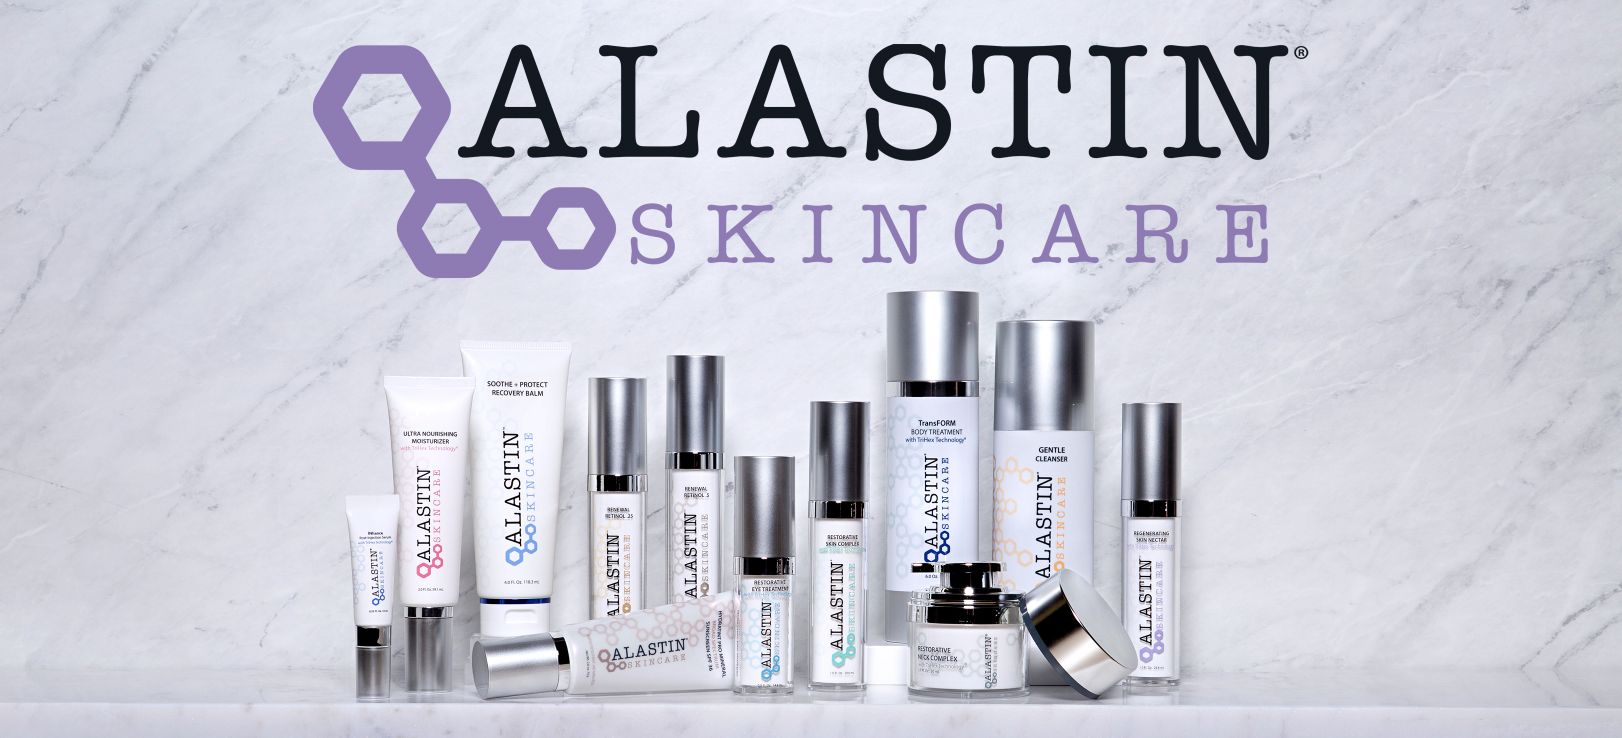 Alastin Skincare line banner, a variety of skincare products against a purple and grey background.